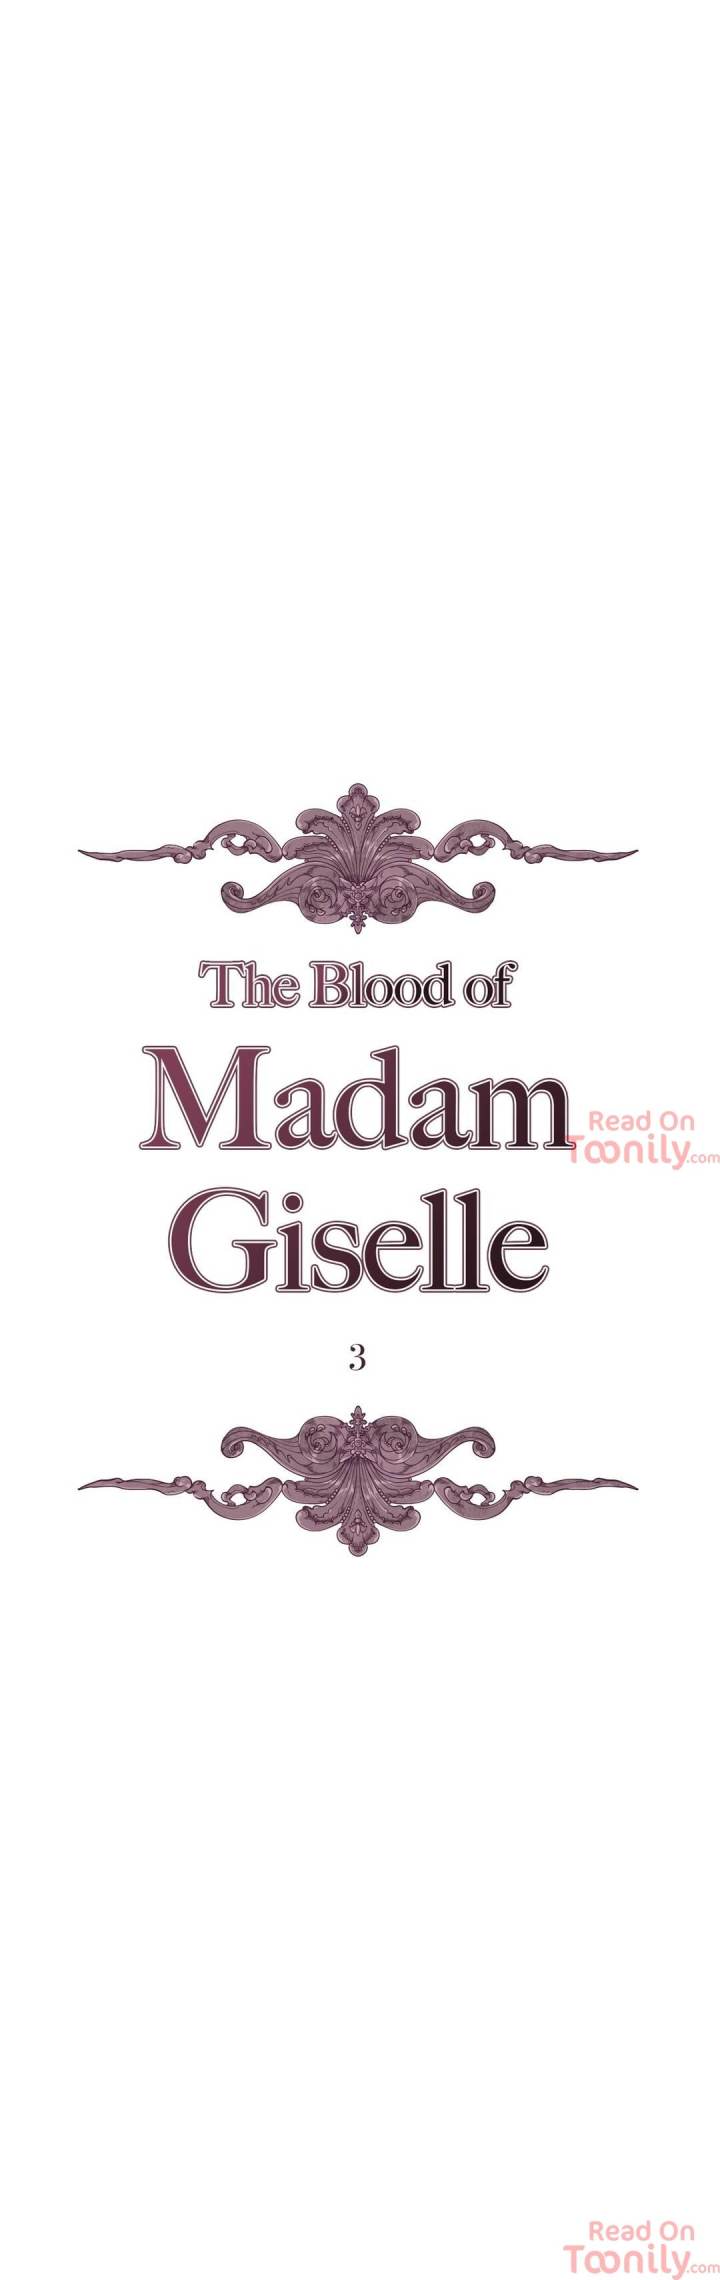 The Blood of Madam Giselle - Chapter 3 Page 1